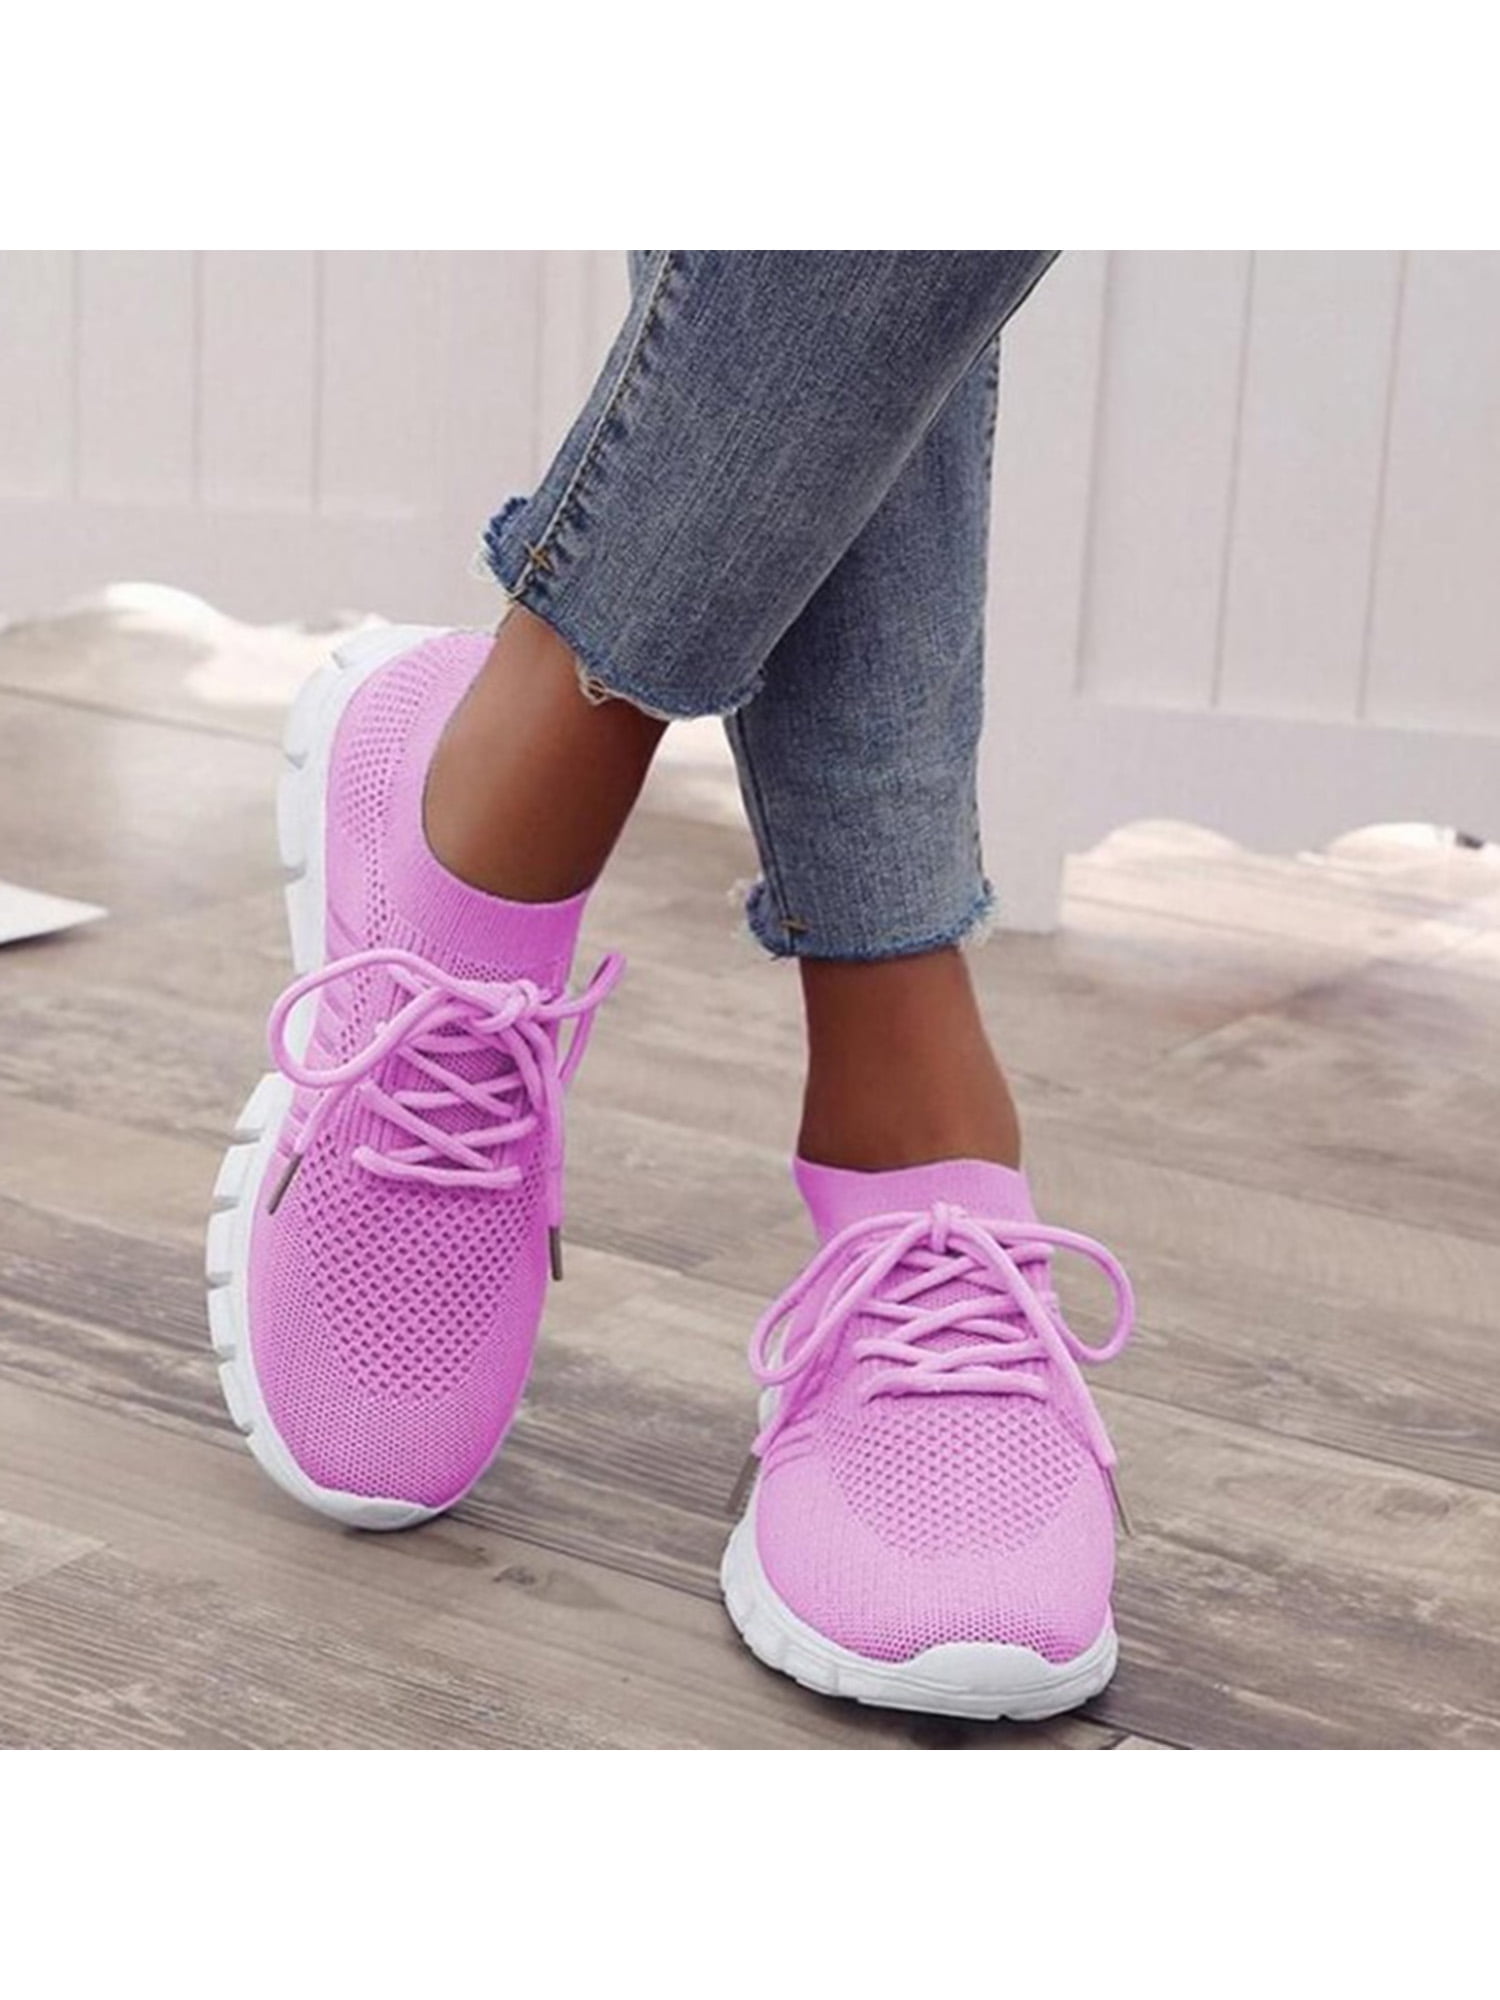 Details about   Women Mesh Breathable Sneakers Walking Trainers Sports Running Lace Up Shoes USA 